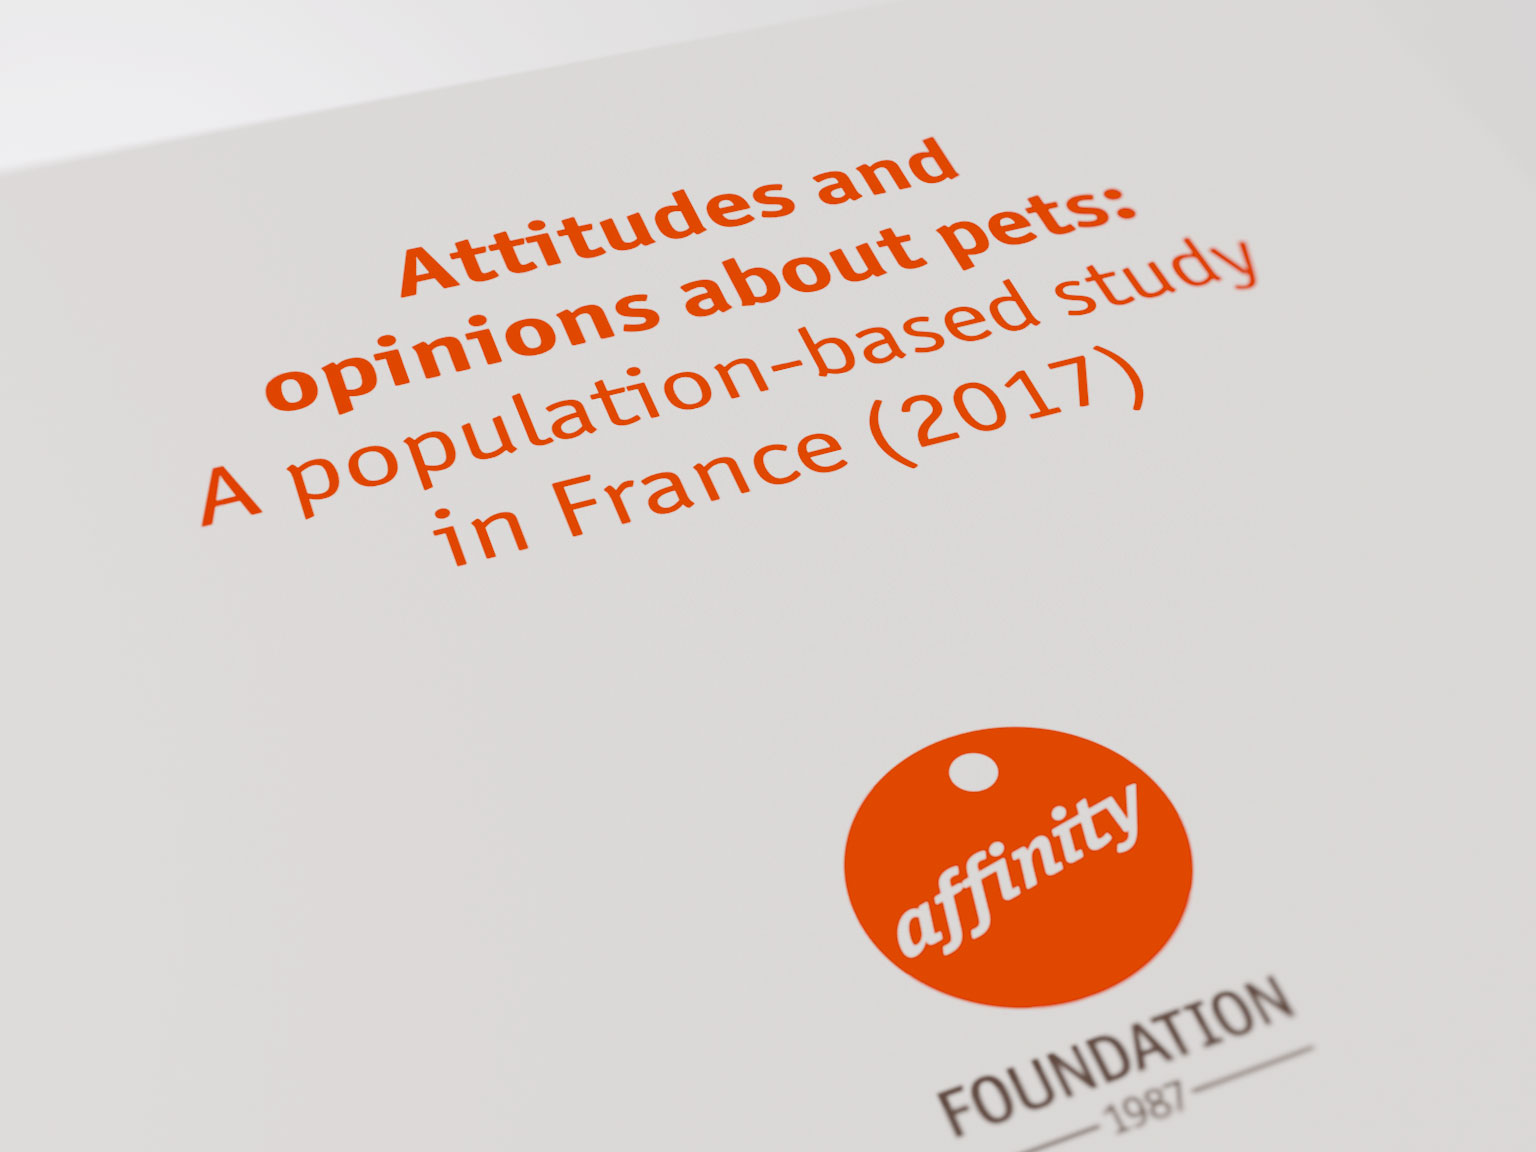 Attitudes and opinions about pets: A population-based study in France (2017)